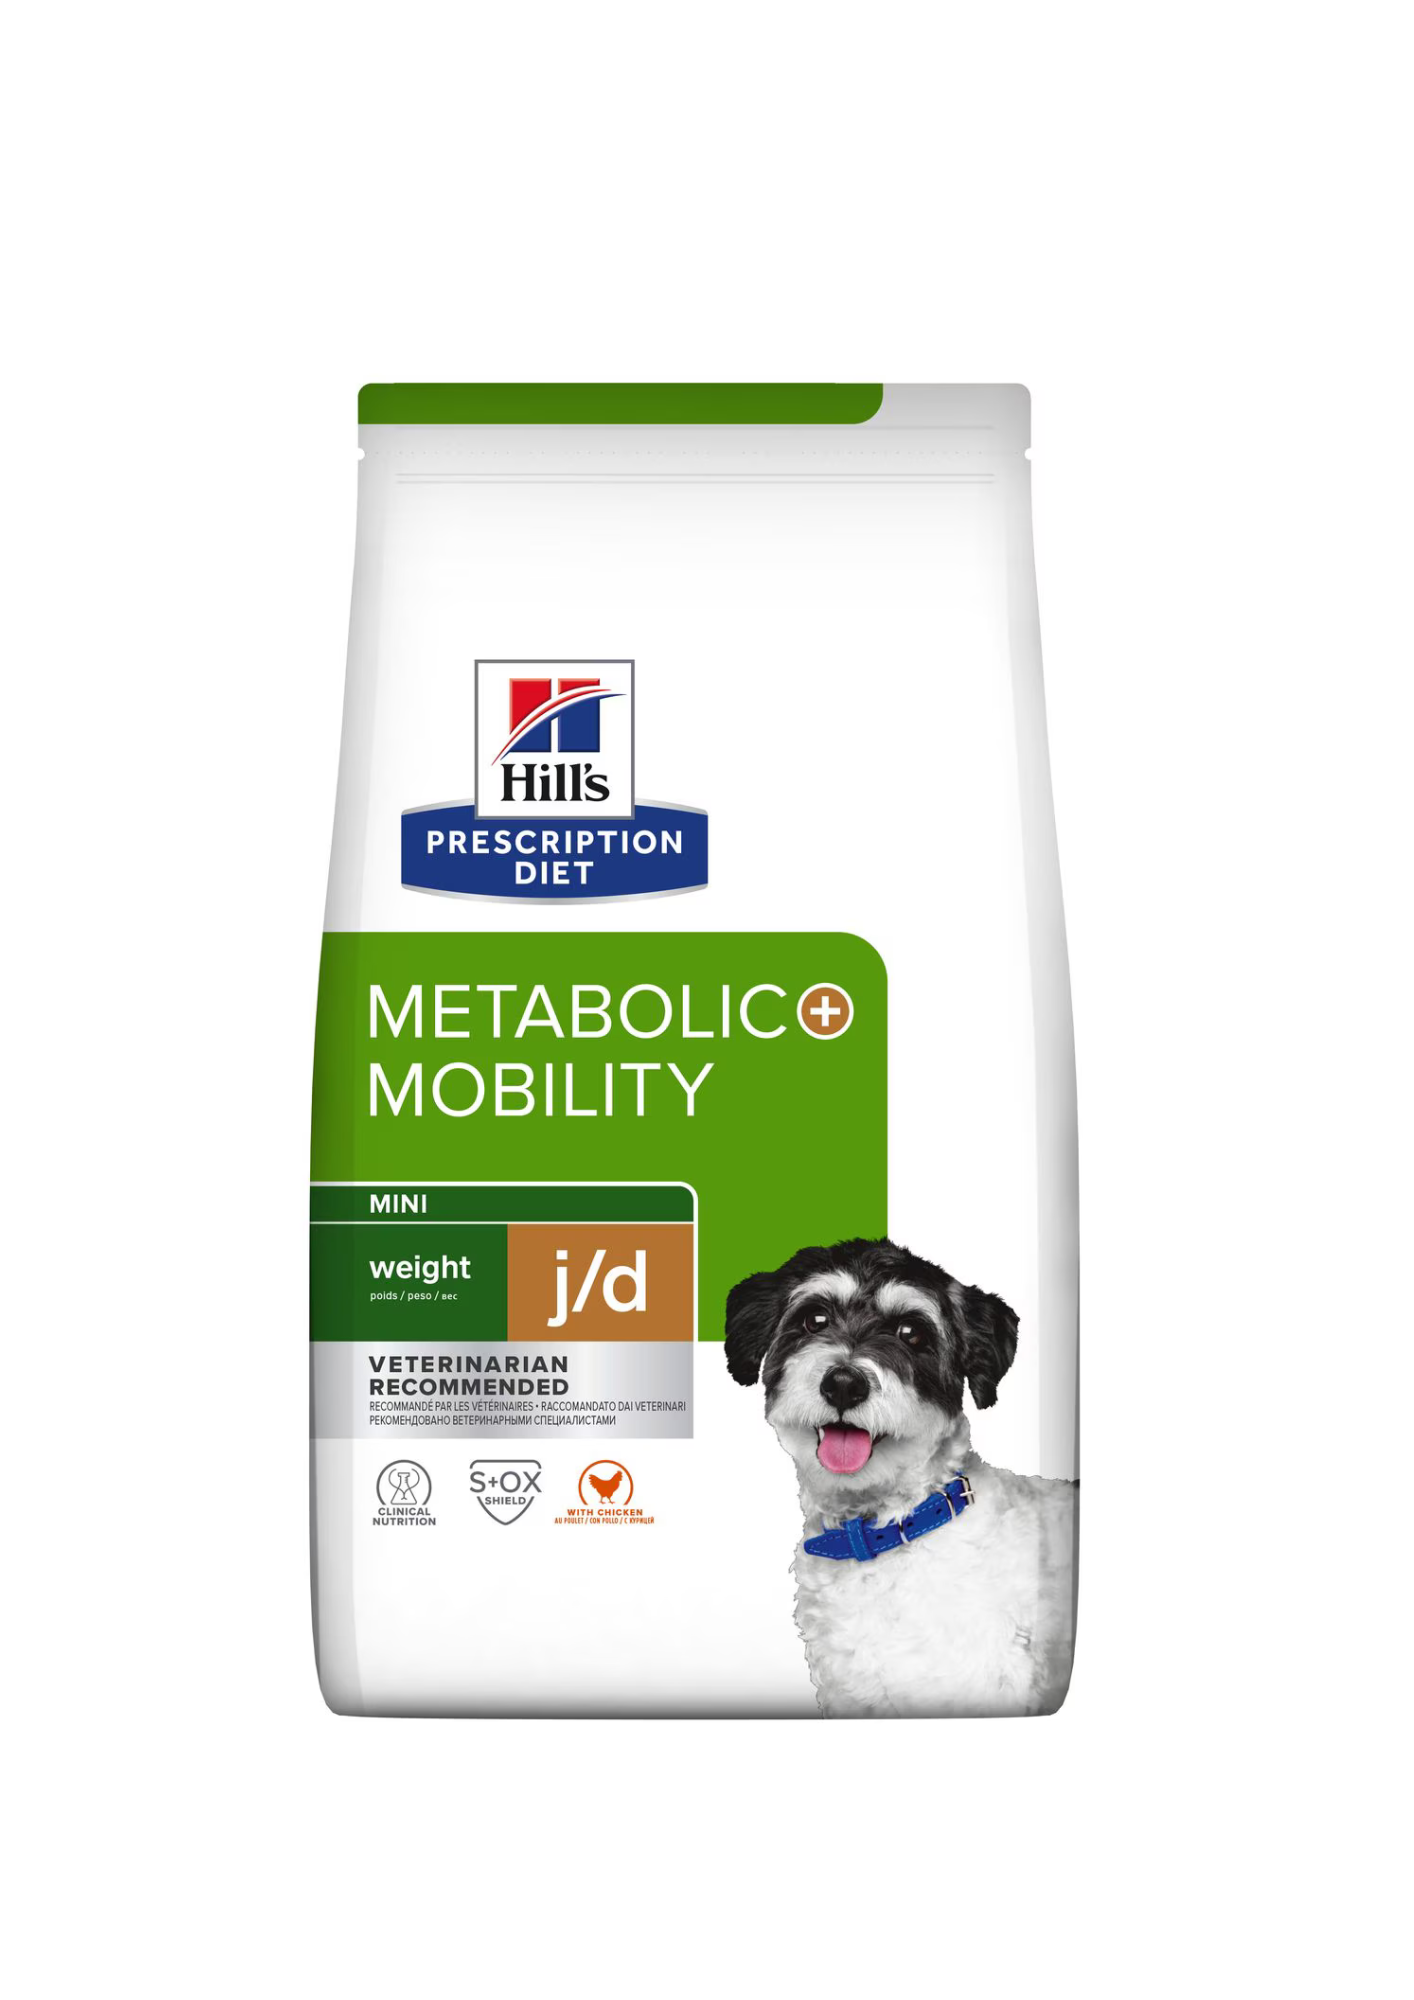 Hill's Metabolic + Mobility Mini Dog Dry Food With Chicken, 1kg